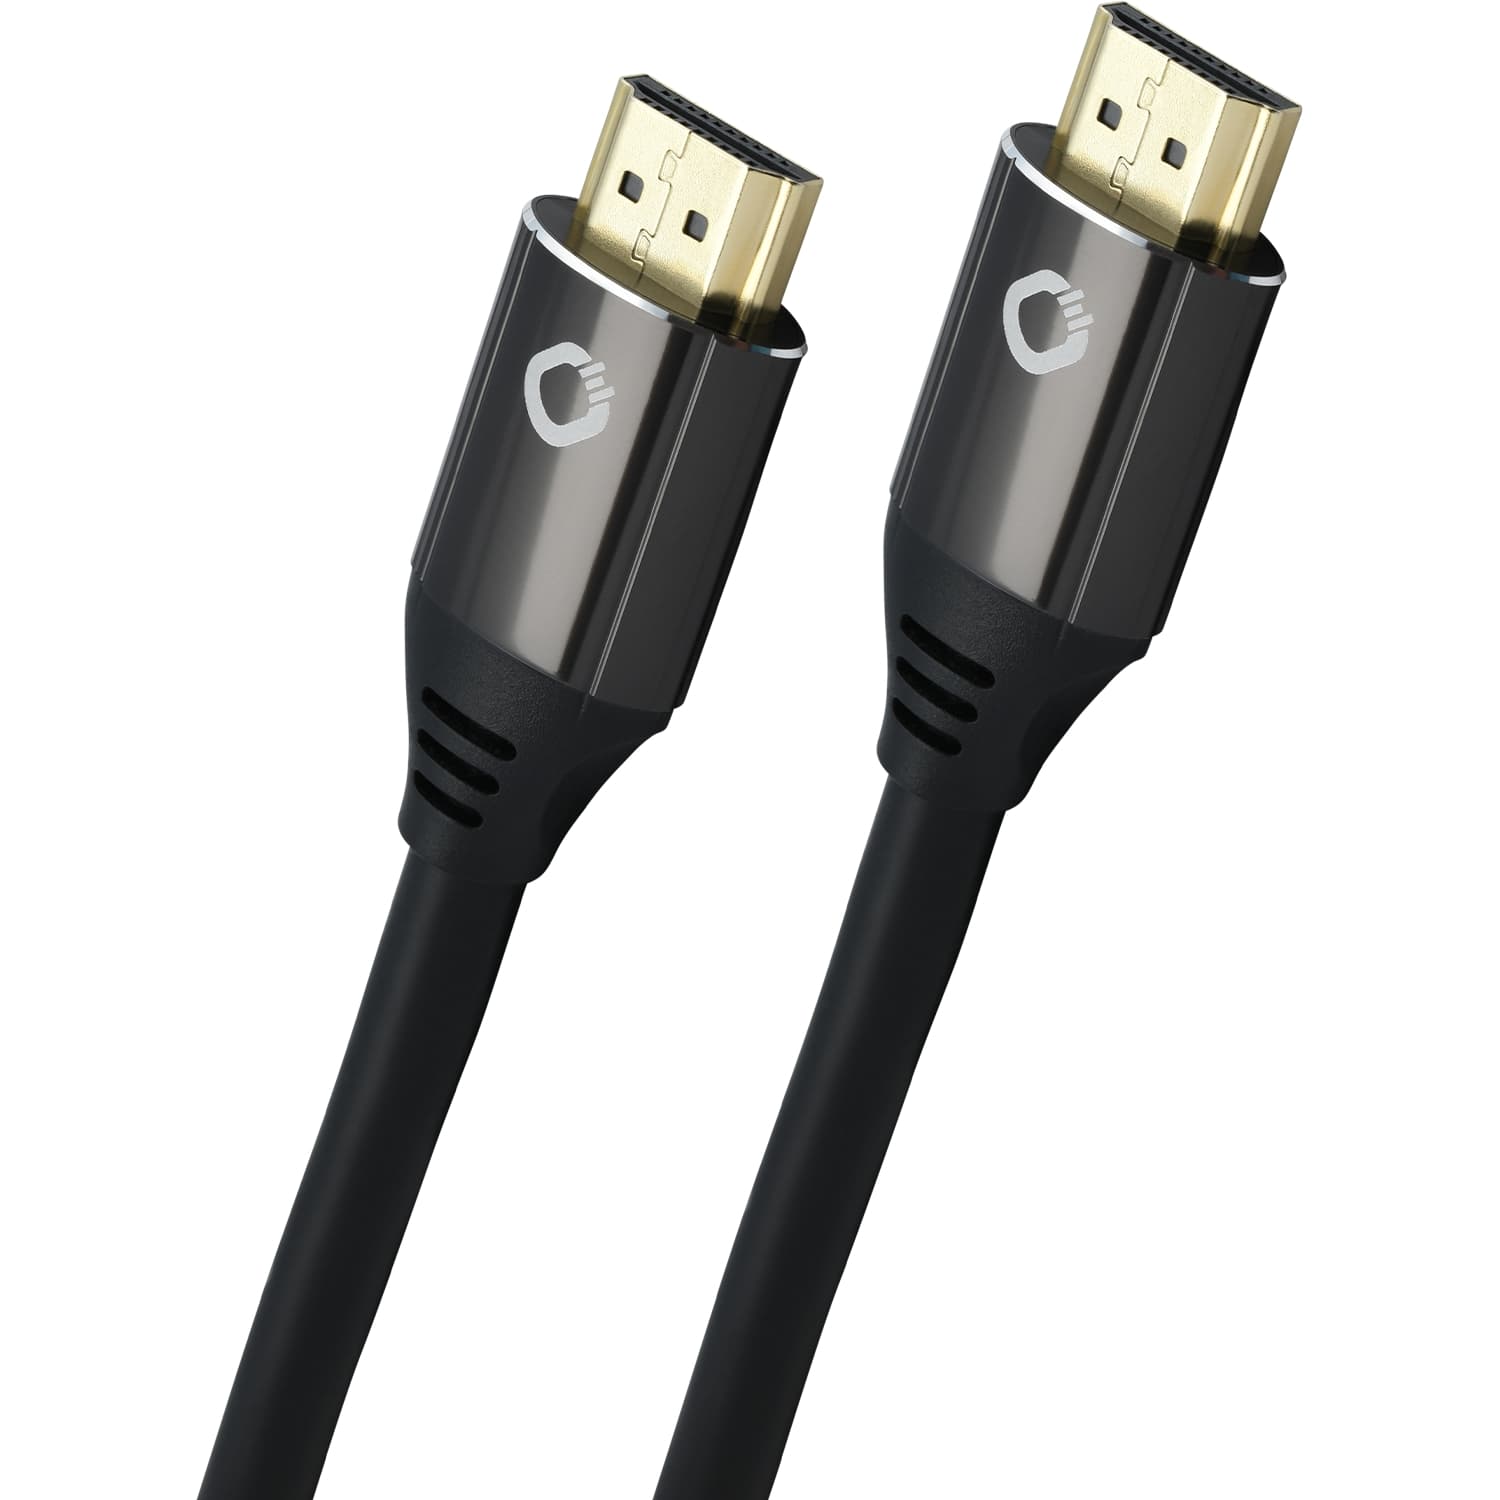 HDMI кабели Oehlbach PERFORMANCE Black Magic MKII, UHS HDMI, 5,0m black, D1C92496 hdmi кабели oehlbach select video link cable 3 0m 33103